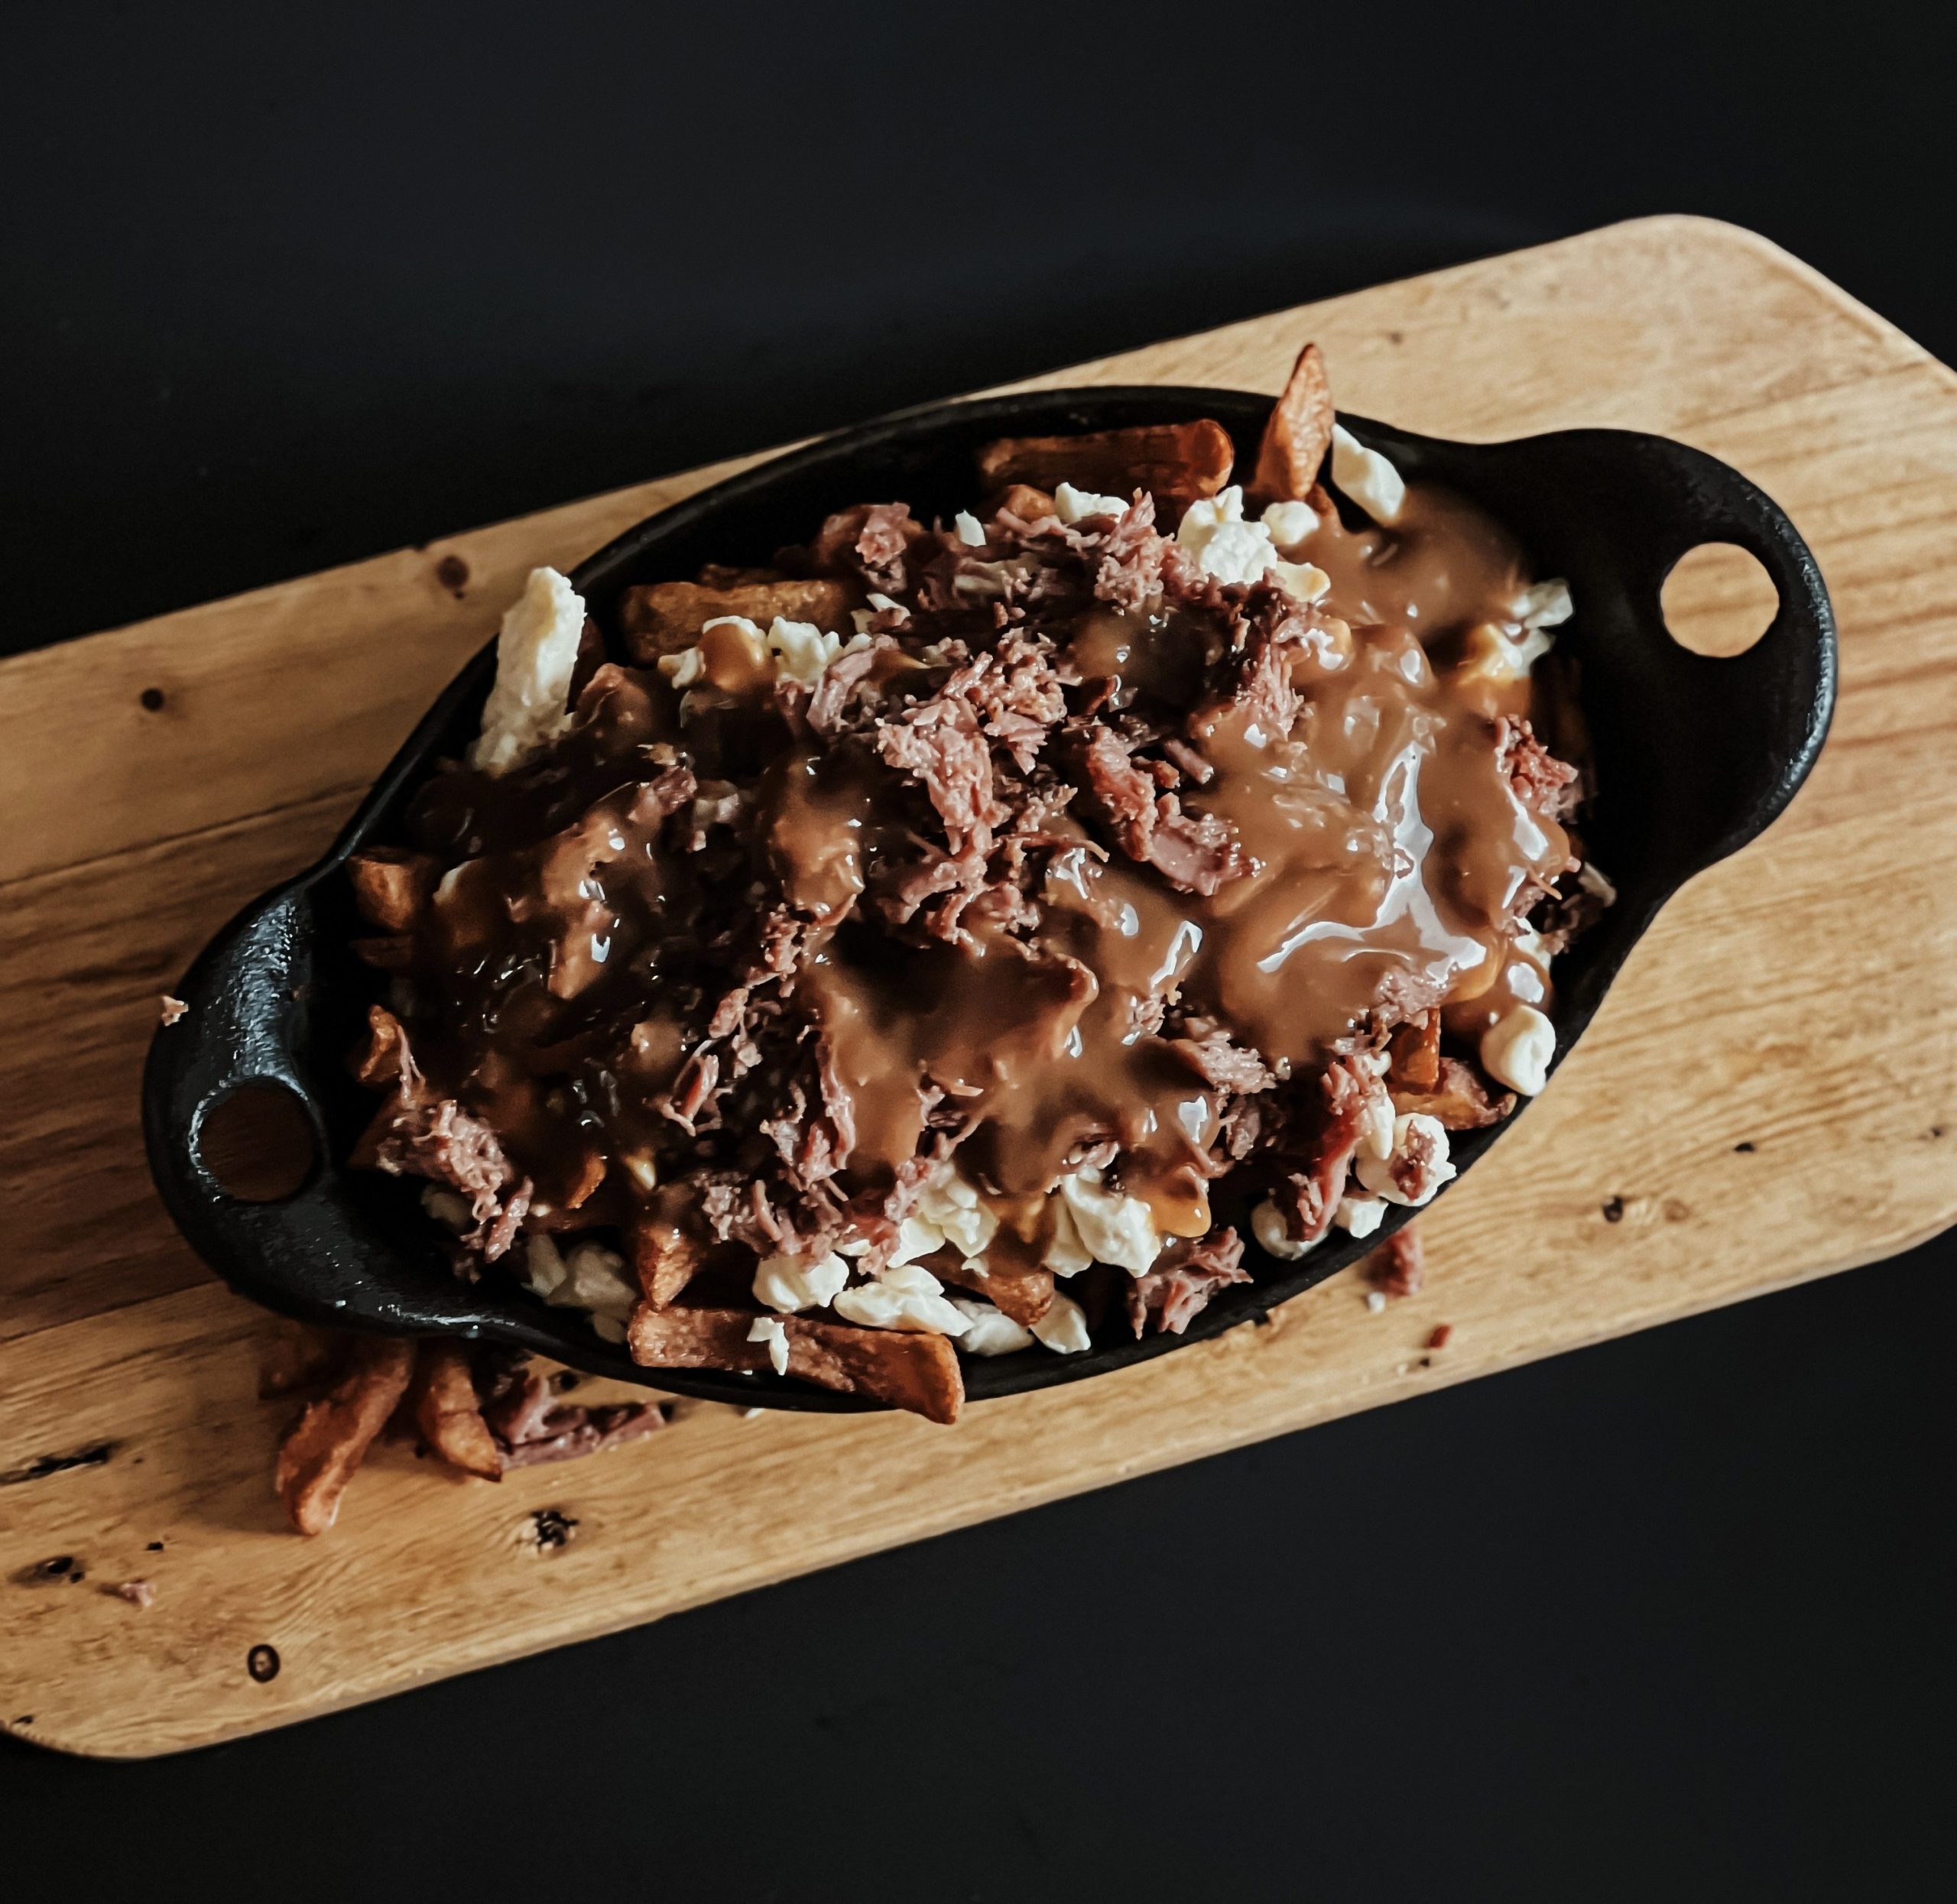 Poutine-smoked-meat-2-scaled-aspect-ratio-264-257